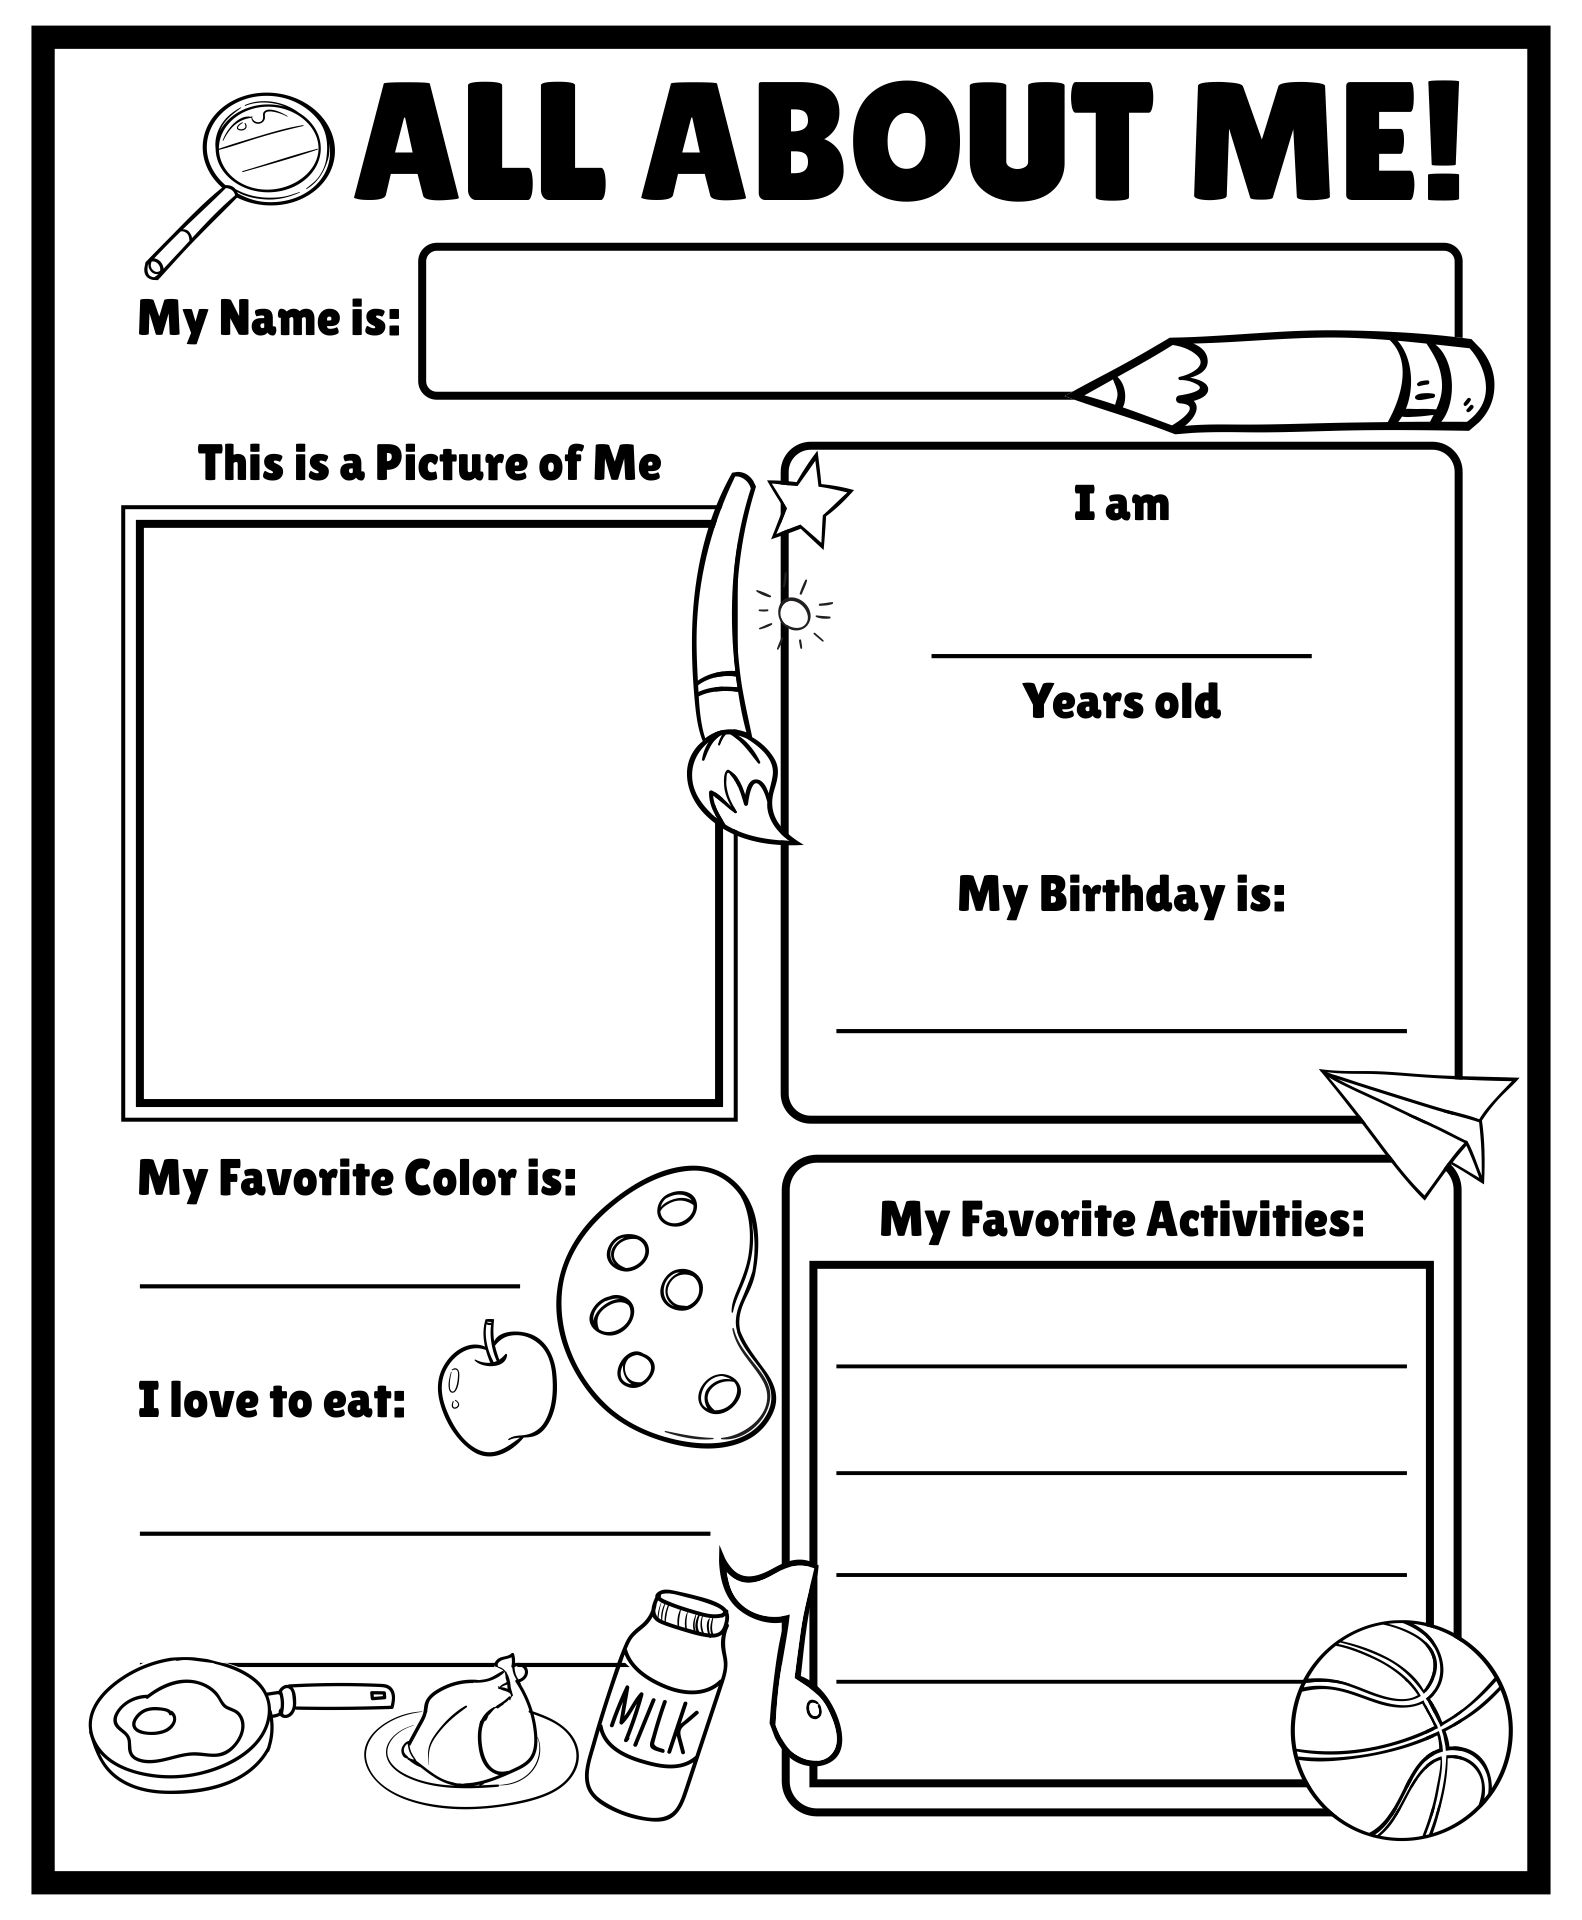 All About Me Book Templates